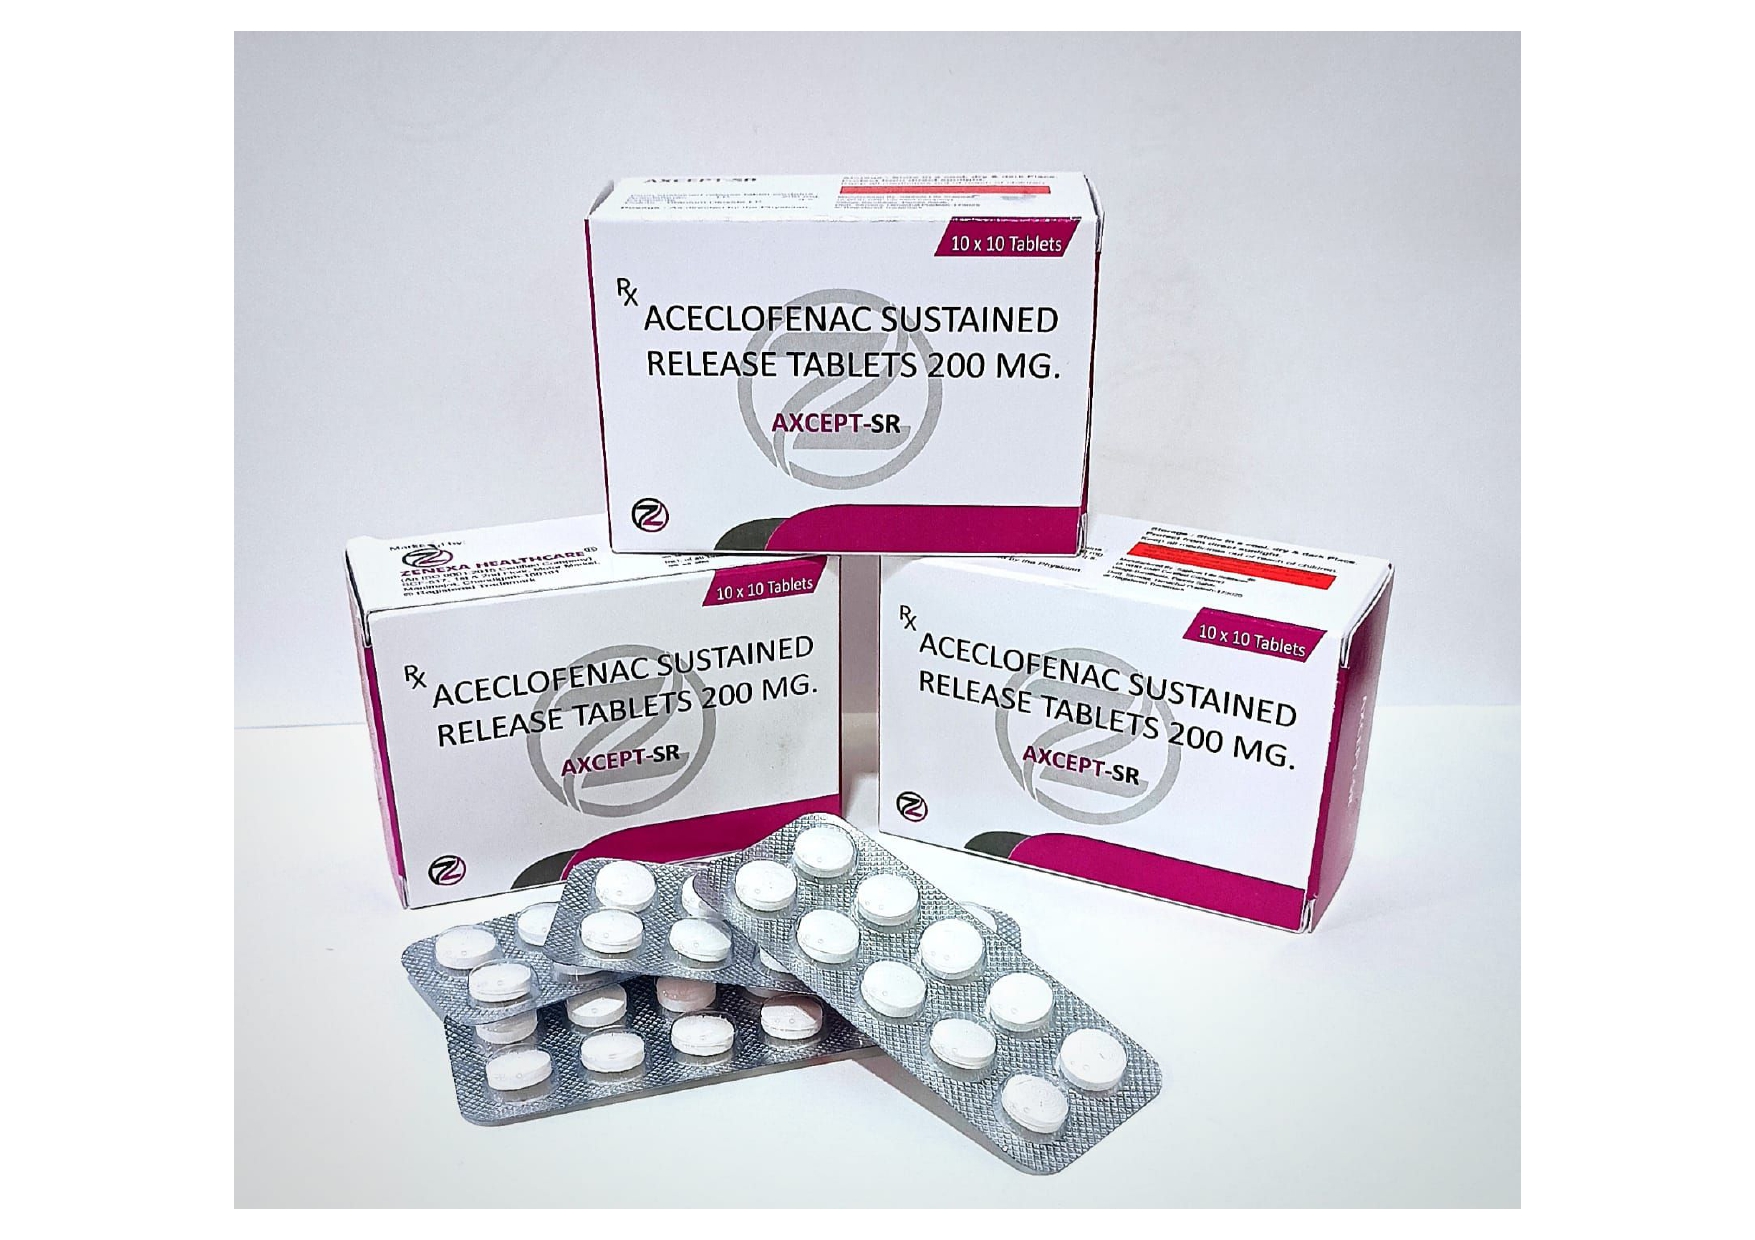 aceclofenac 200mg sustained release tablets